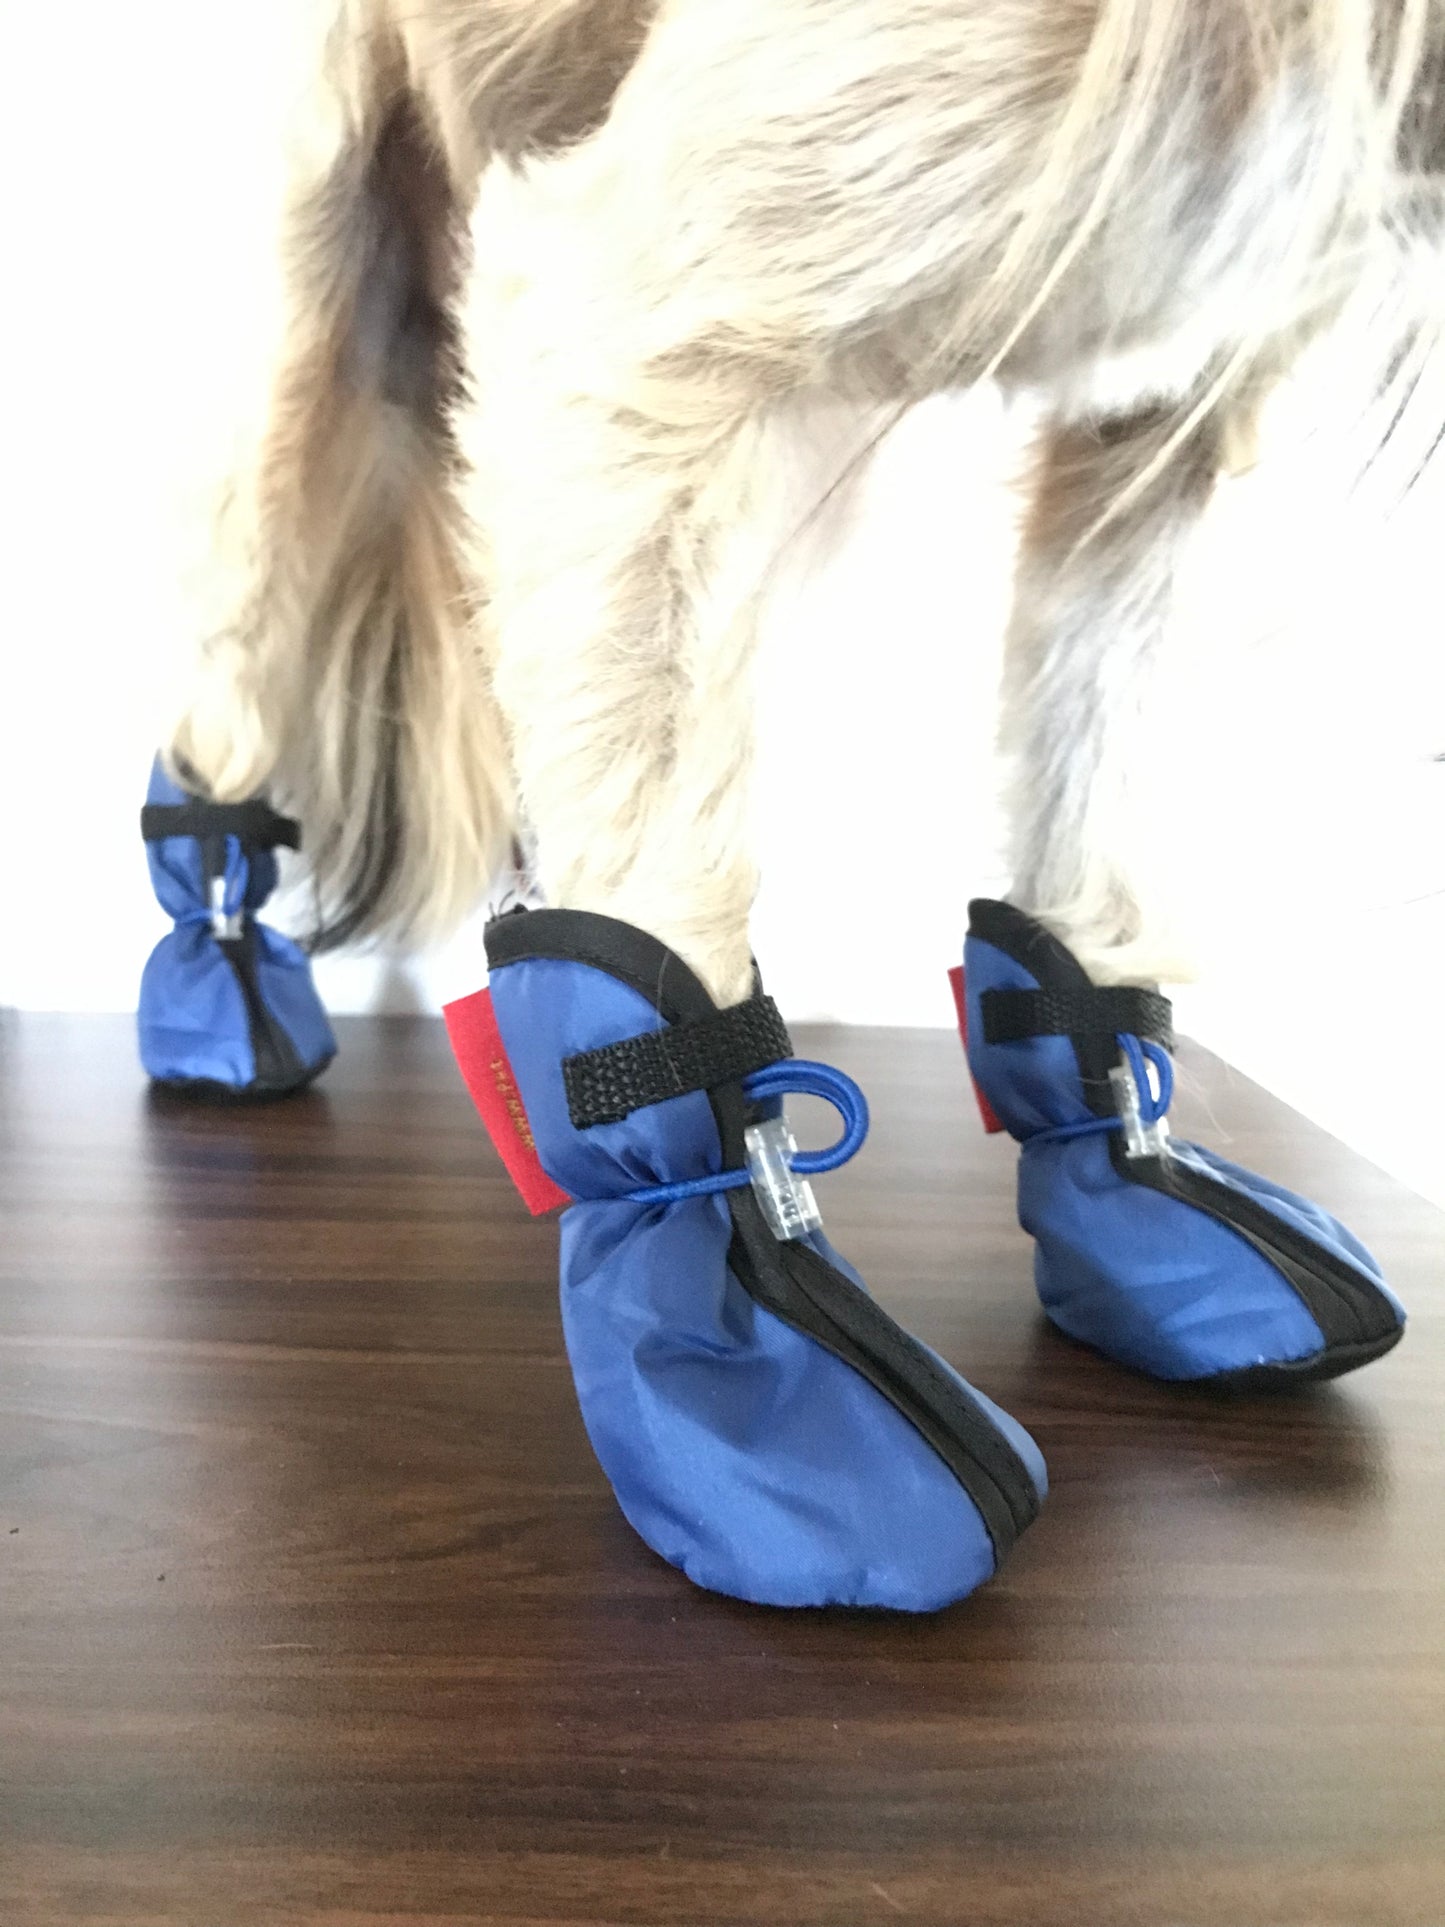 Dog Pet Boots Set of 4 Stay-On Indoor Outdoor weatherproof Nylon Shoes protection